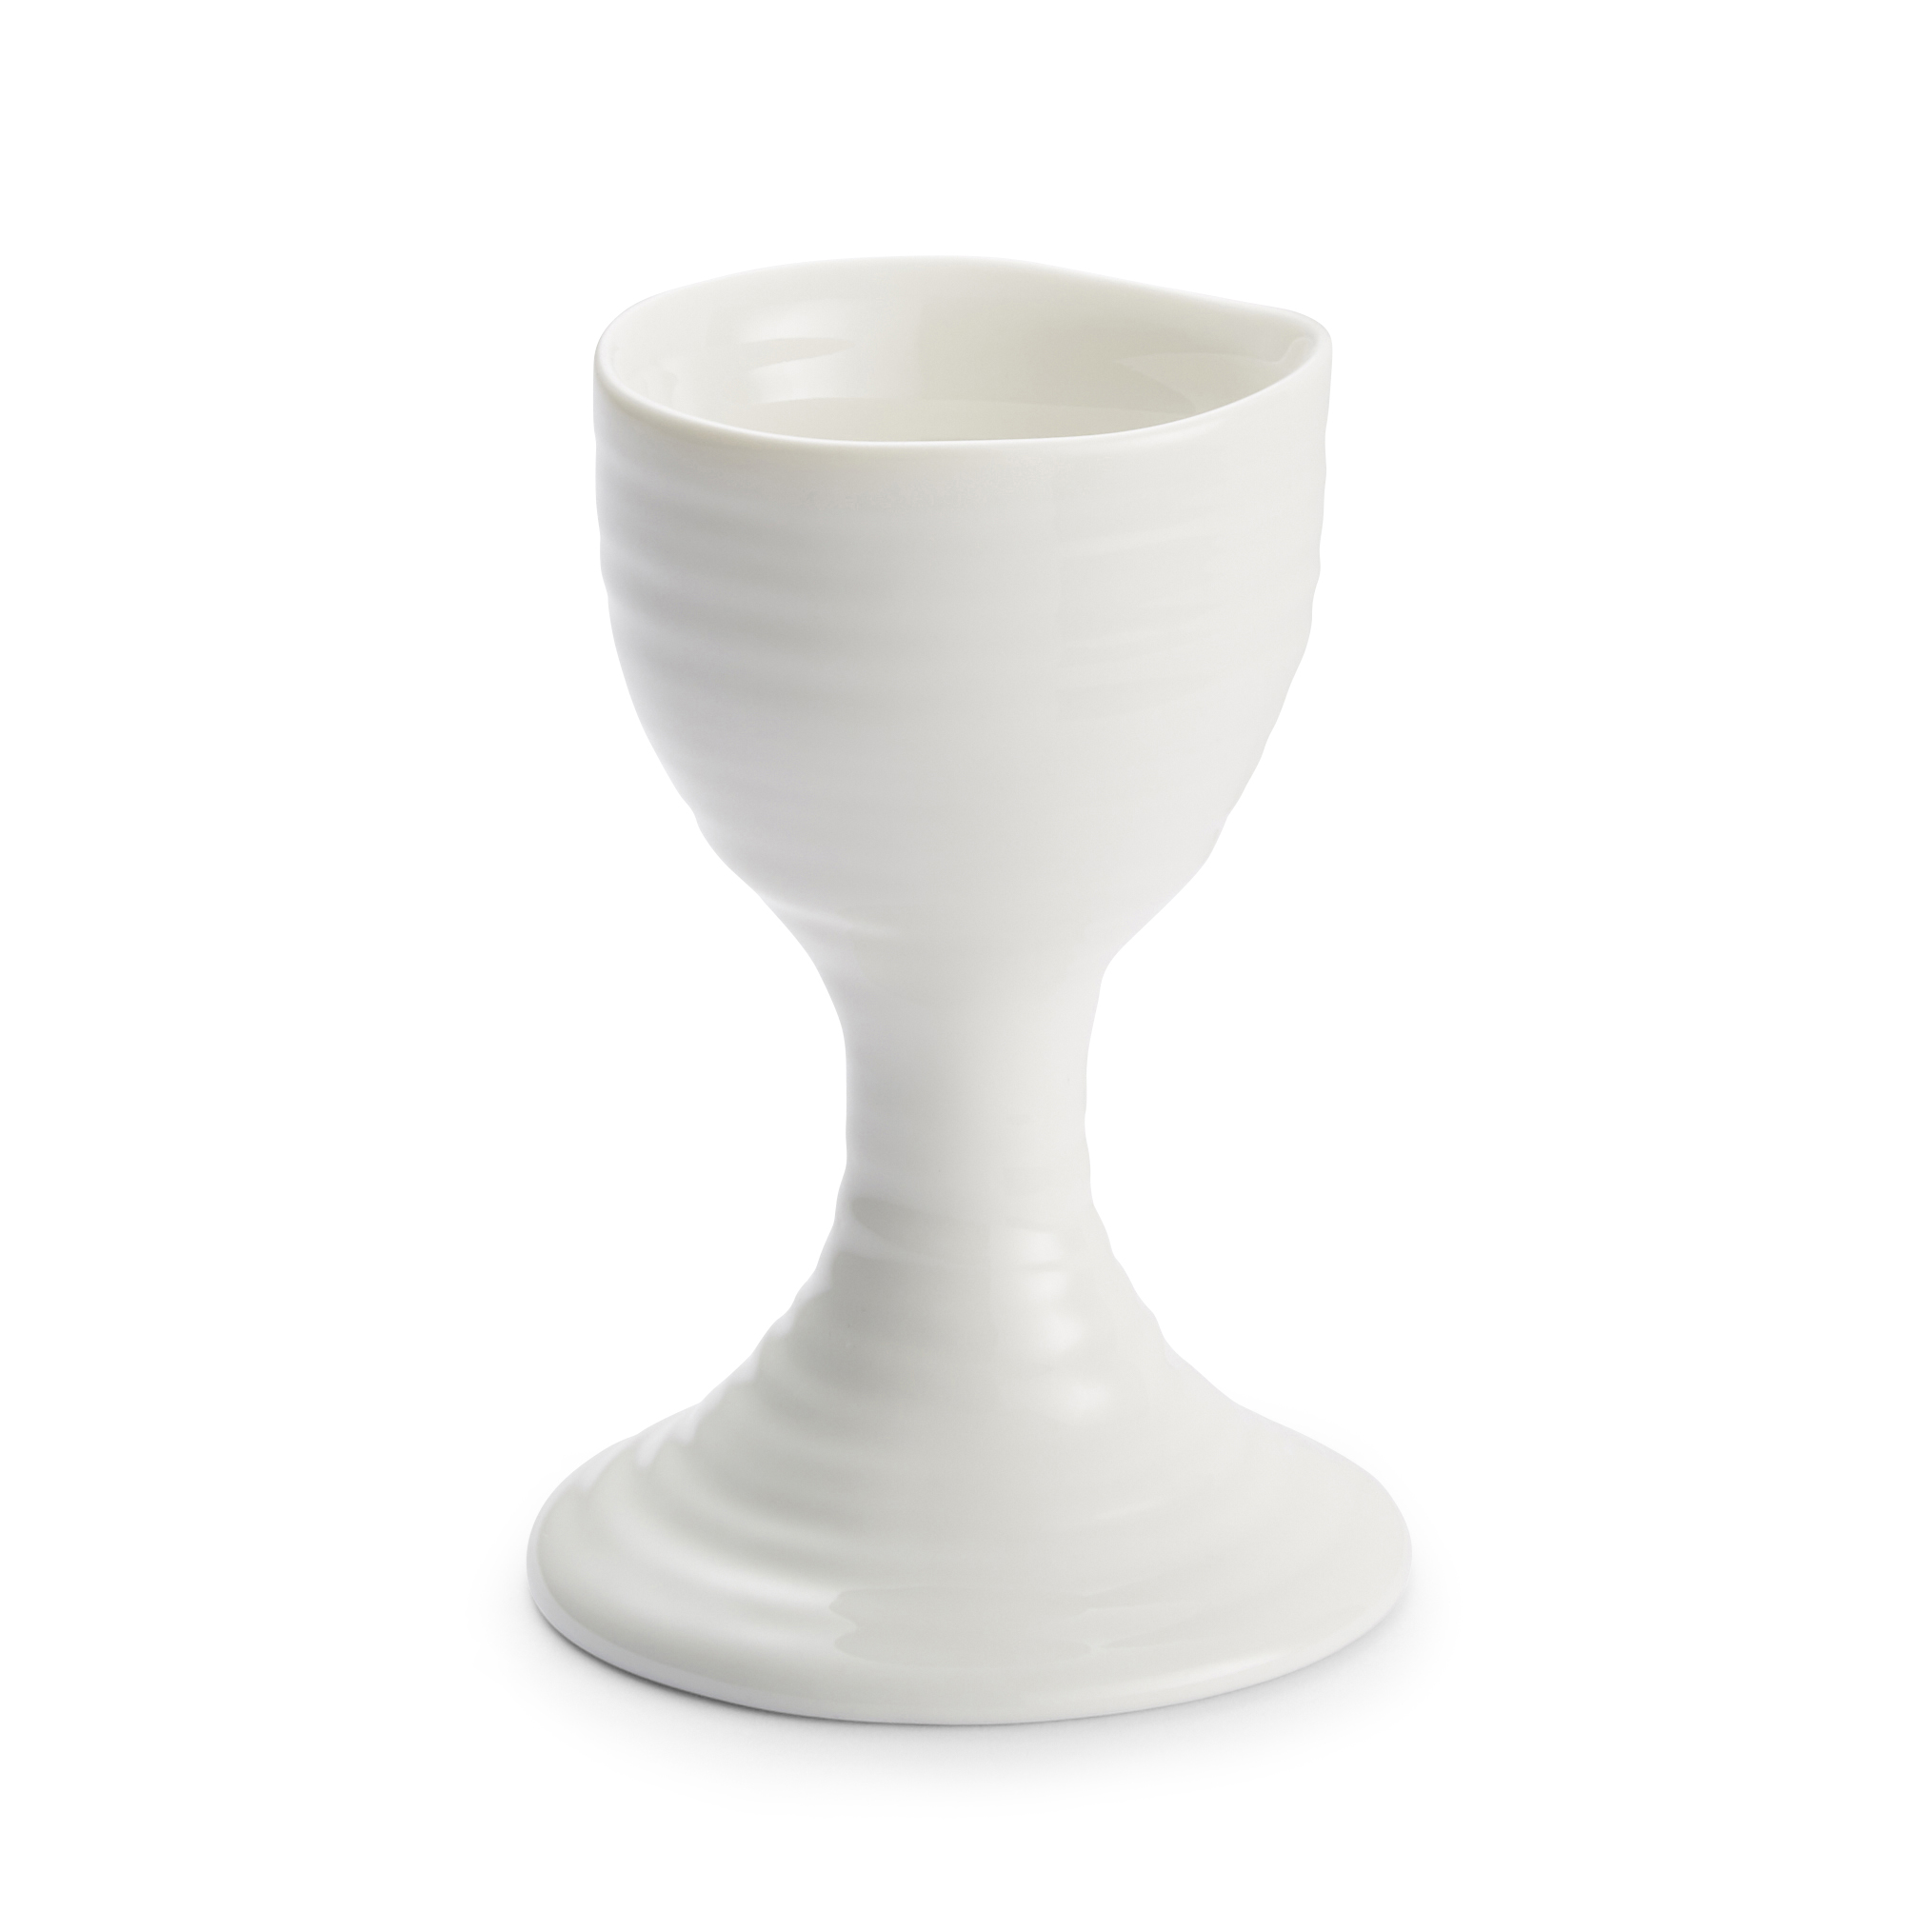 Sophie Conran Set of 2 Egg Cups, White image number null